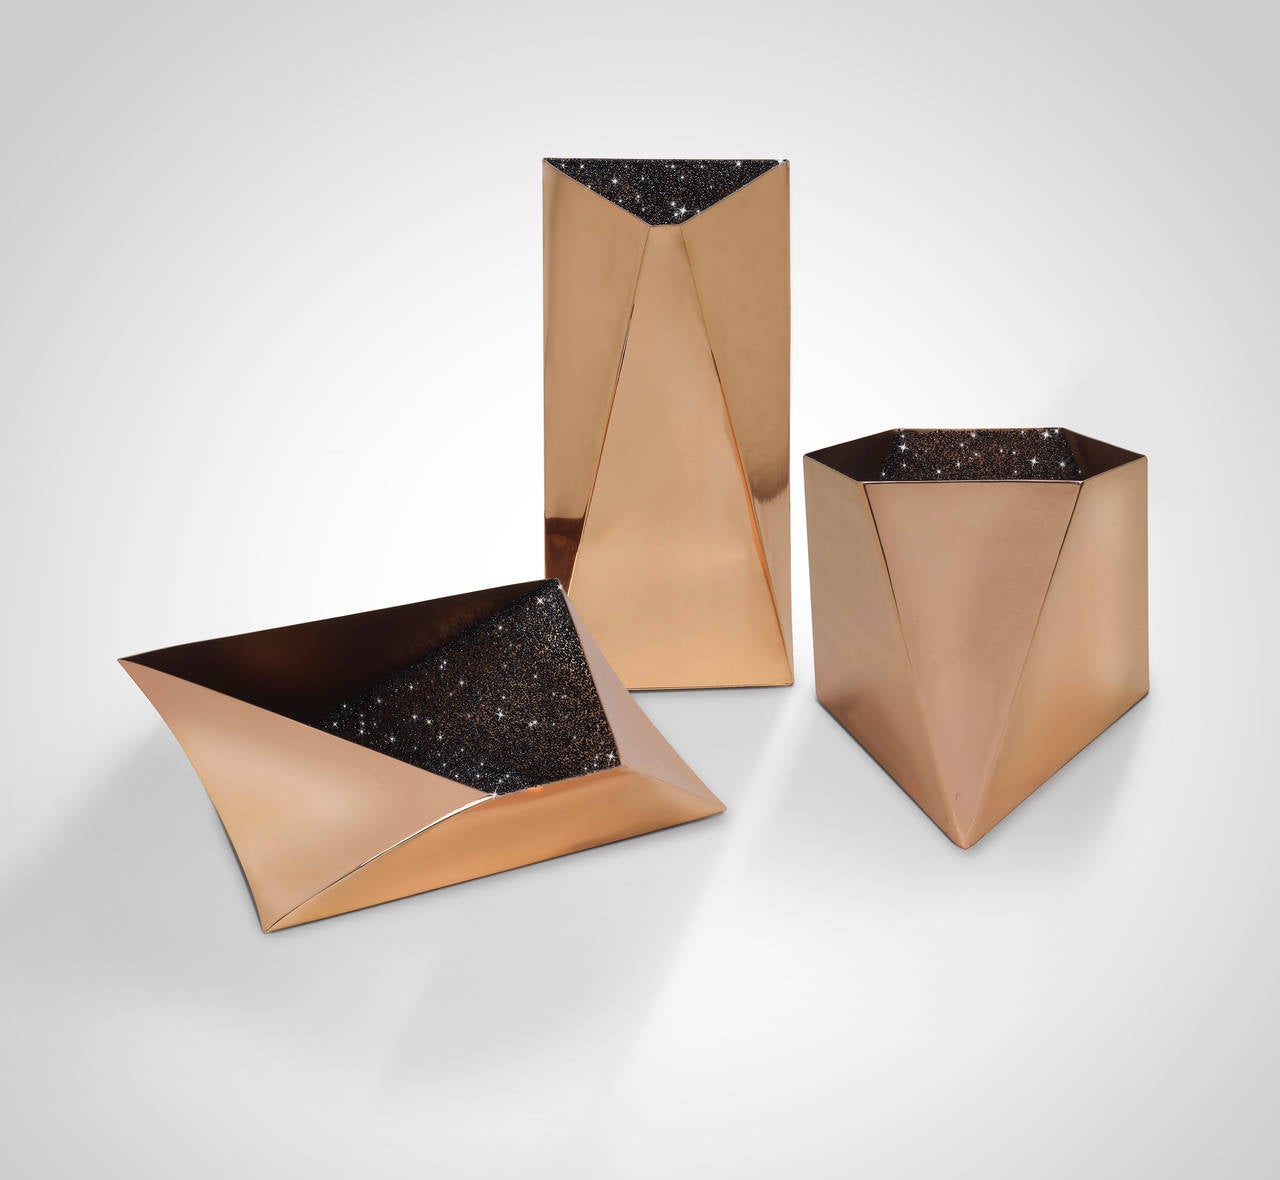 A stunning piece of art, star is a set of three vessels in copper and Swarovski Elements black crystals designed by British architect David Adjaye. One of the world’s leading architects of his generation, Adjaye was chosen to design the Smithsonian